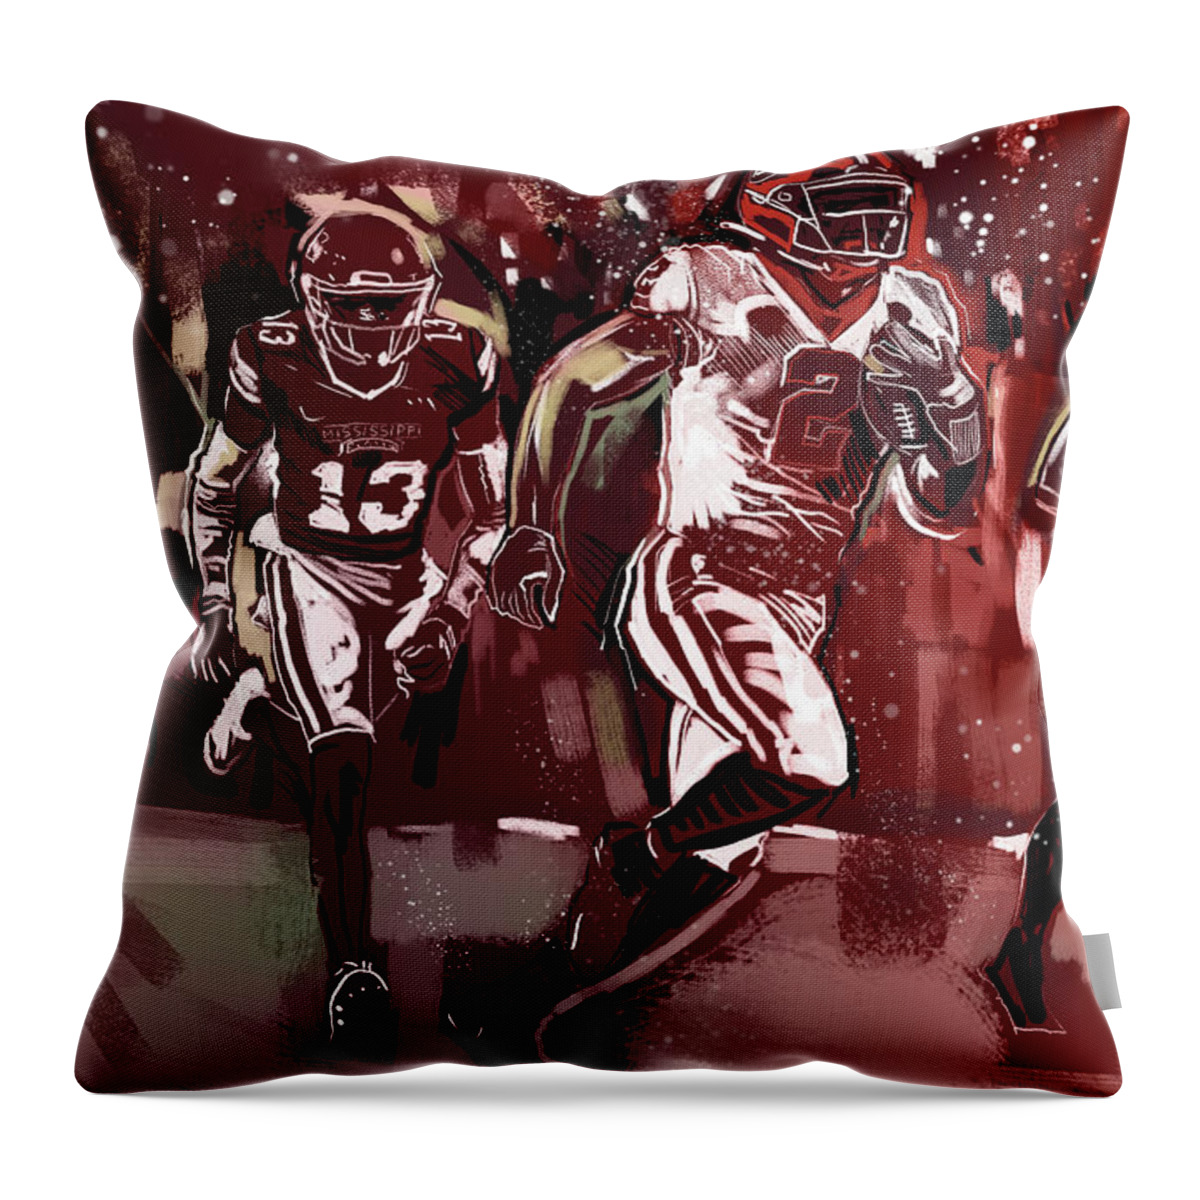 Ms State Victory Throw Pillow featuring the painting Ms State Victory by John Gholson